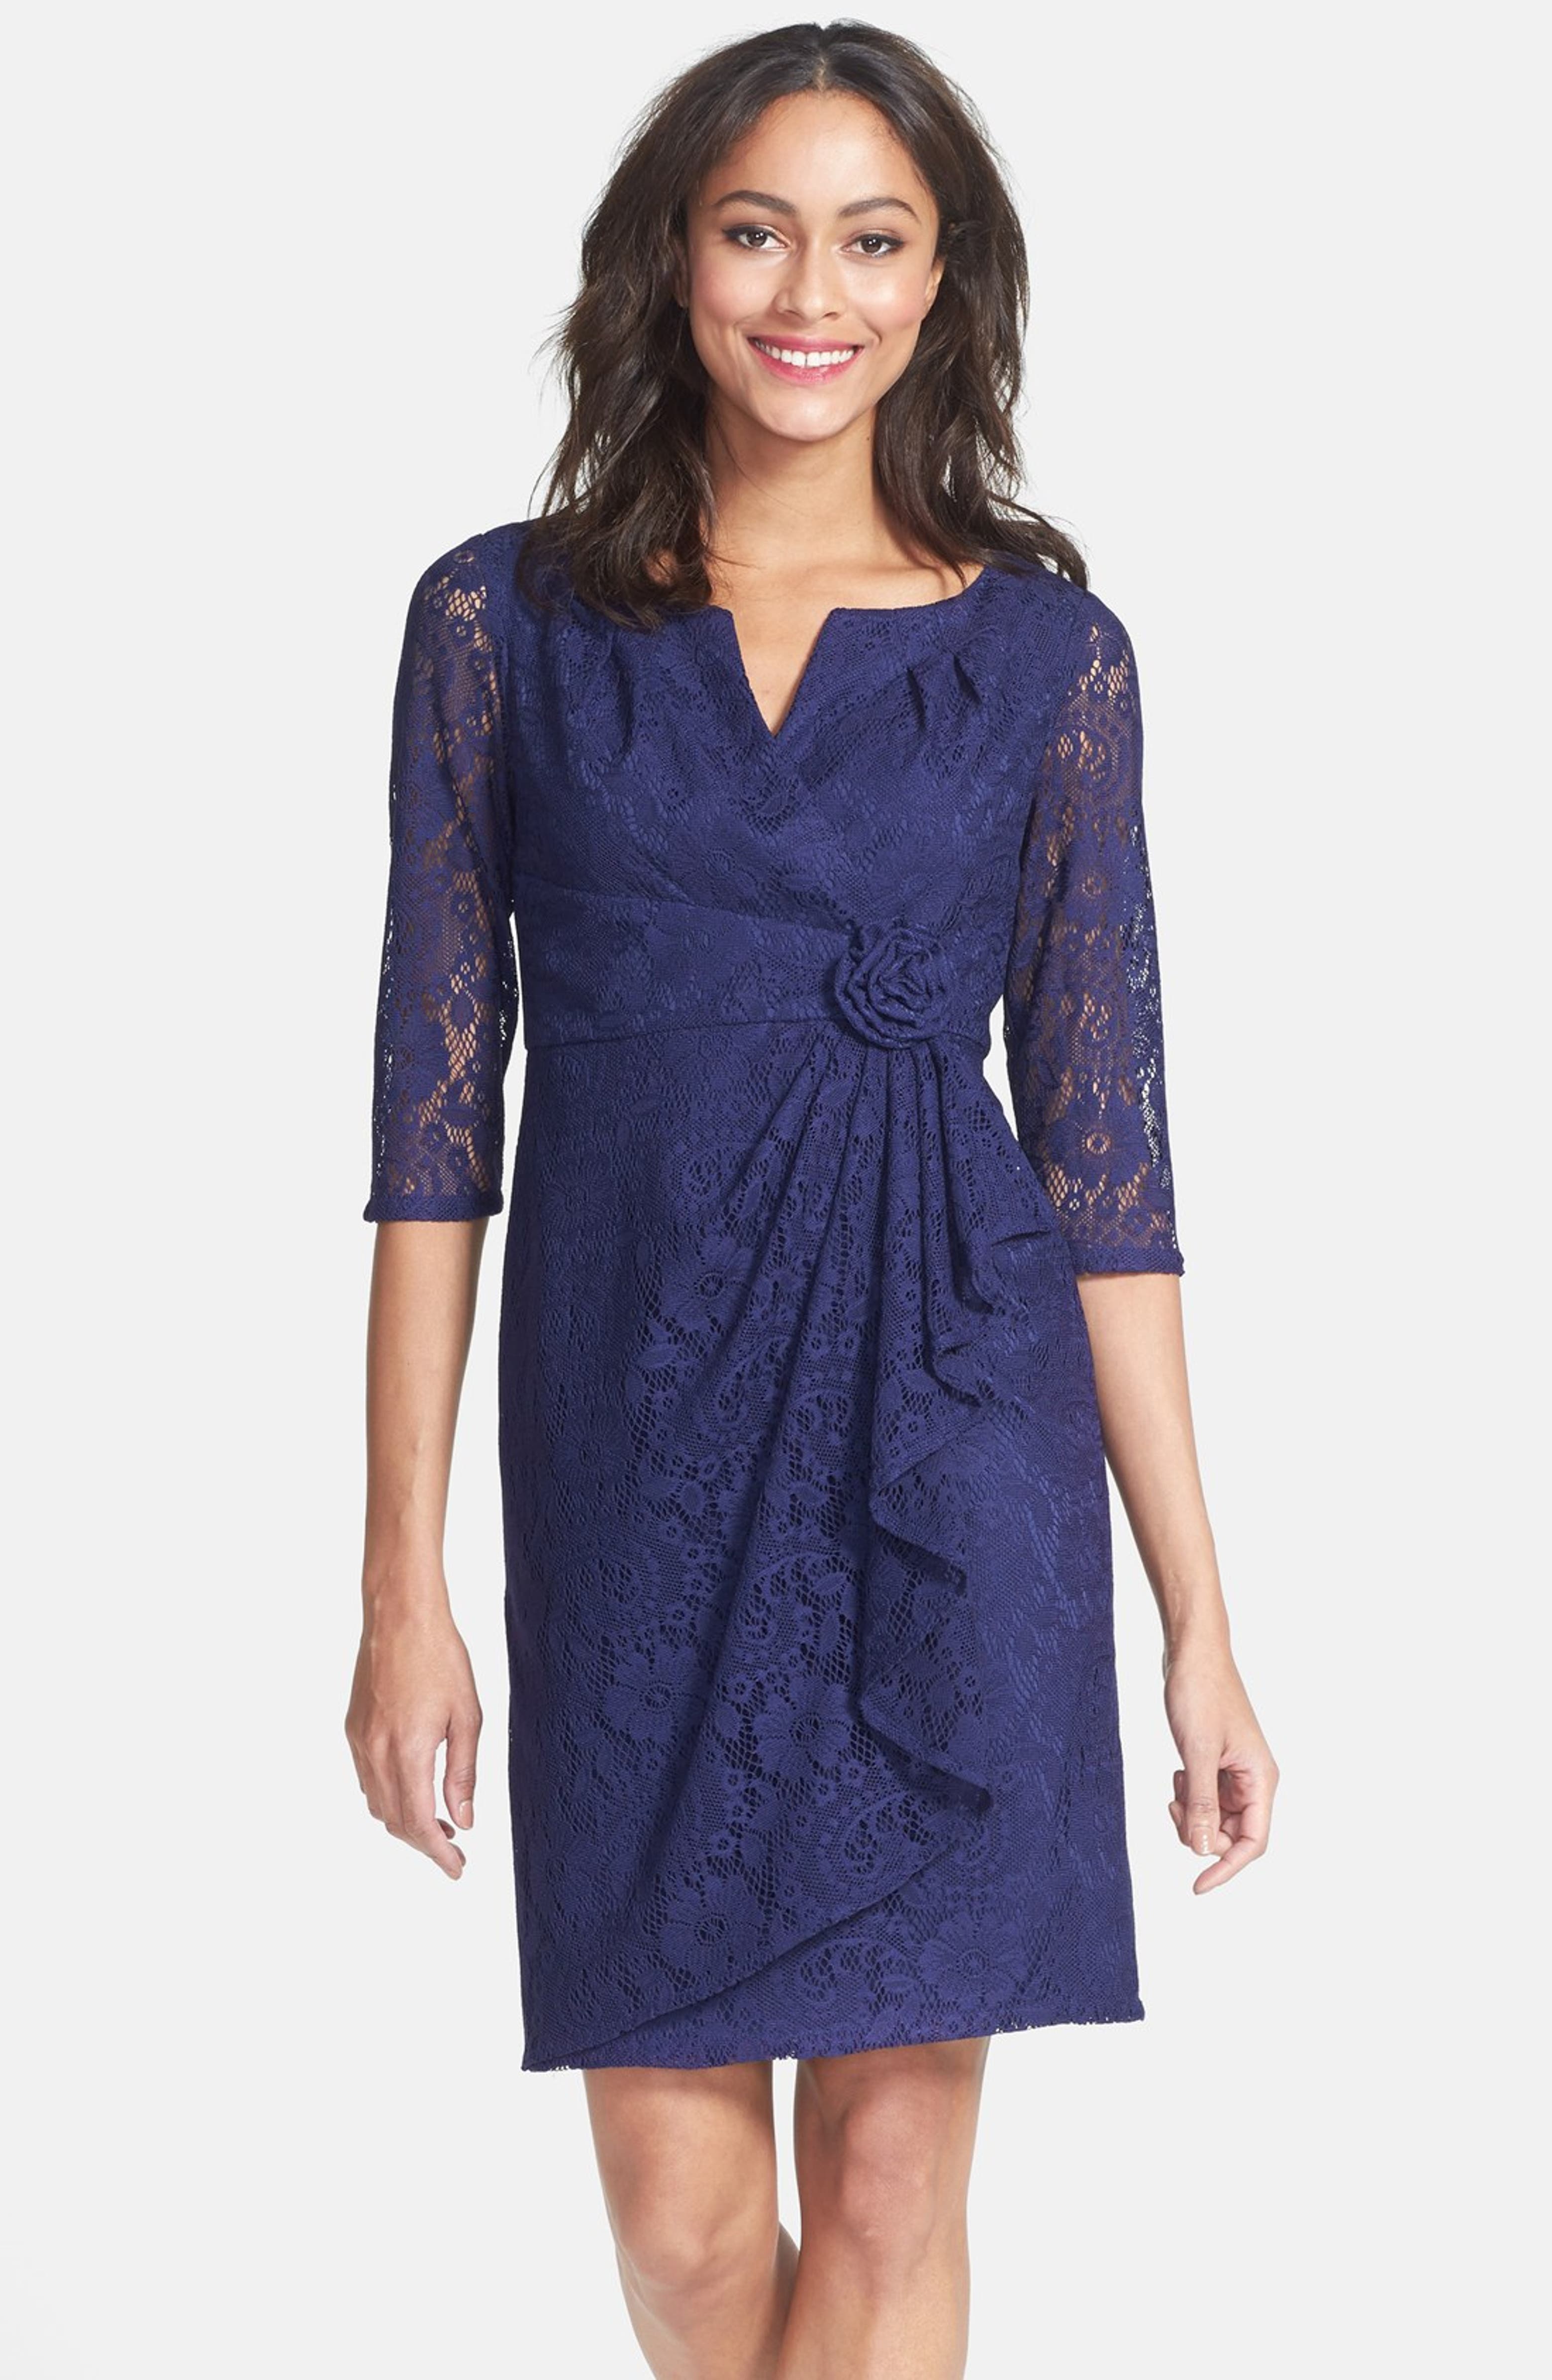 Adrianna Papell Rosette Side Lace Dress | Nordstrom